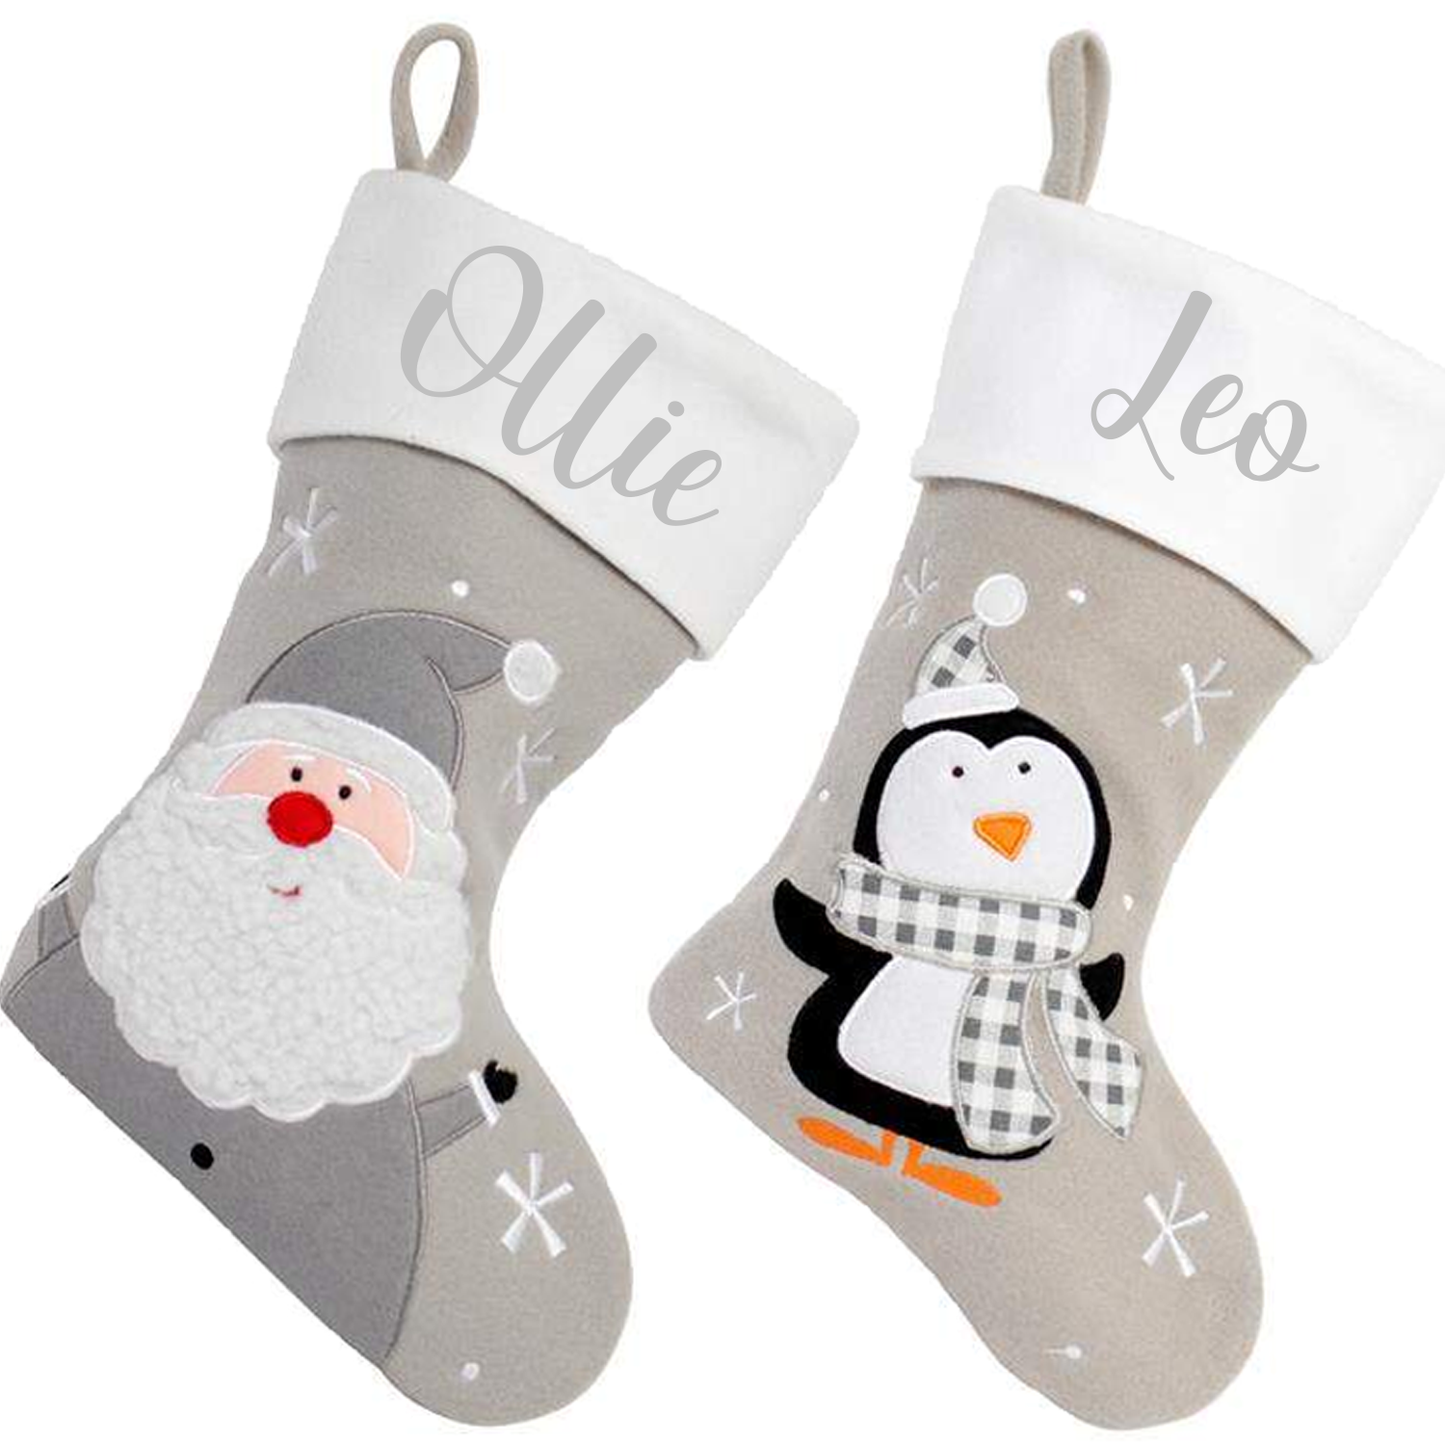 Deluxe Silver Theme Personalised Stocking